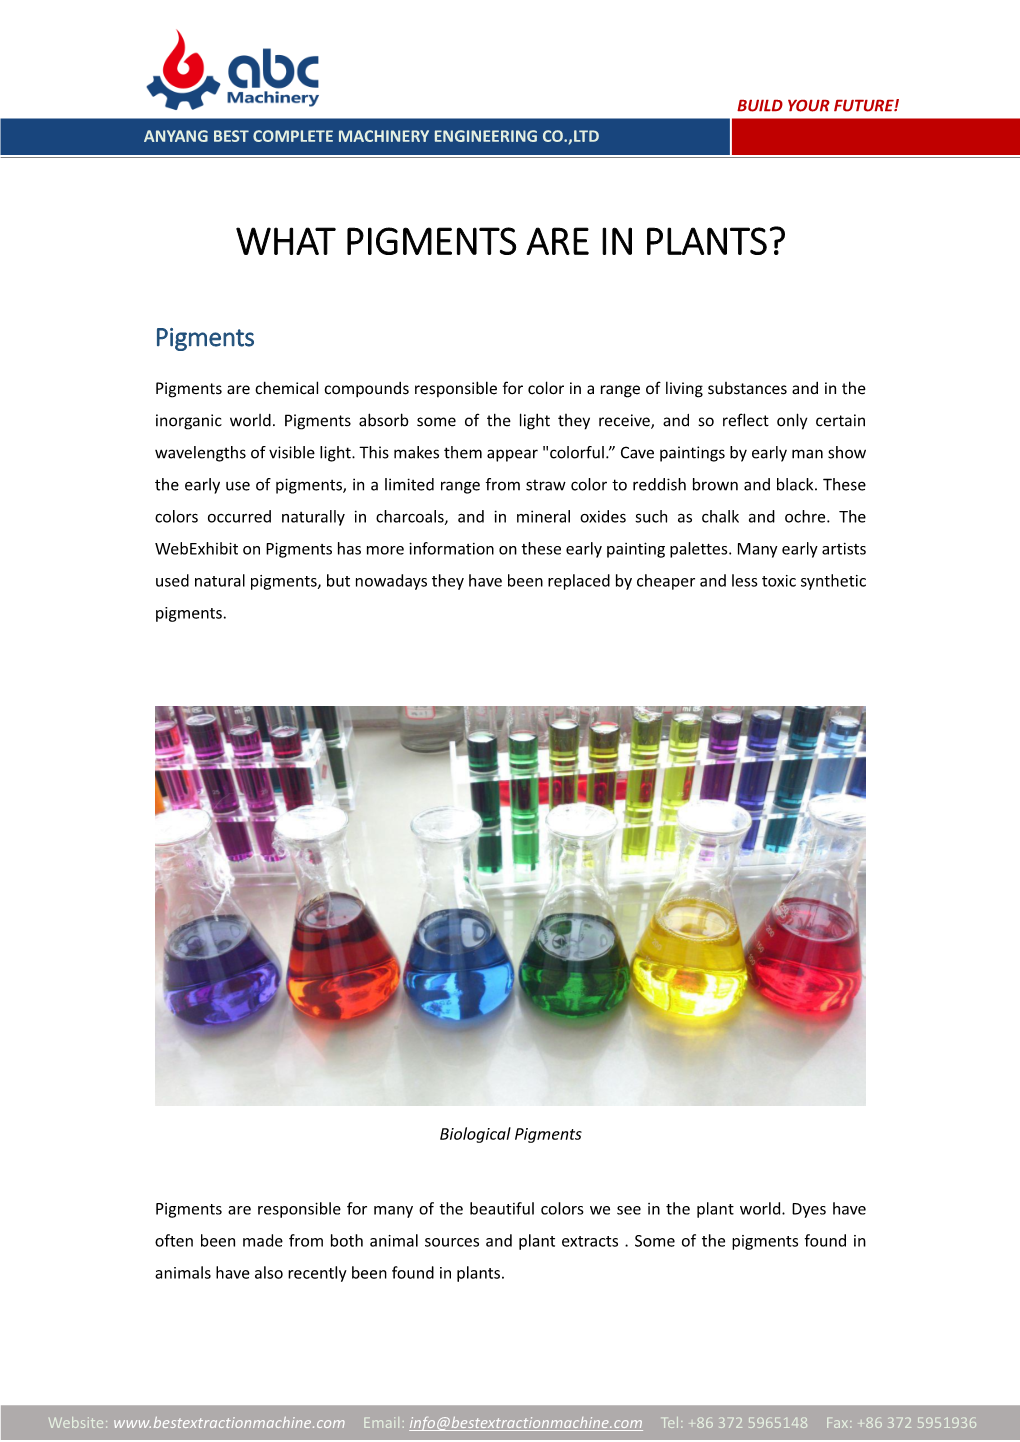 What Pigments Are in Plants?